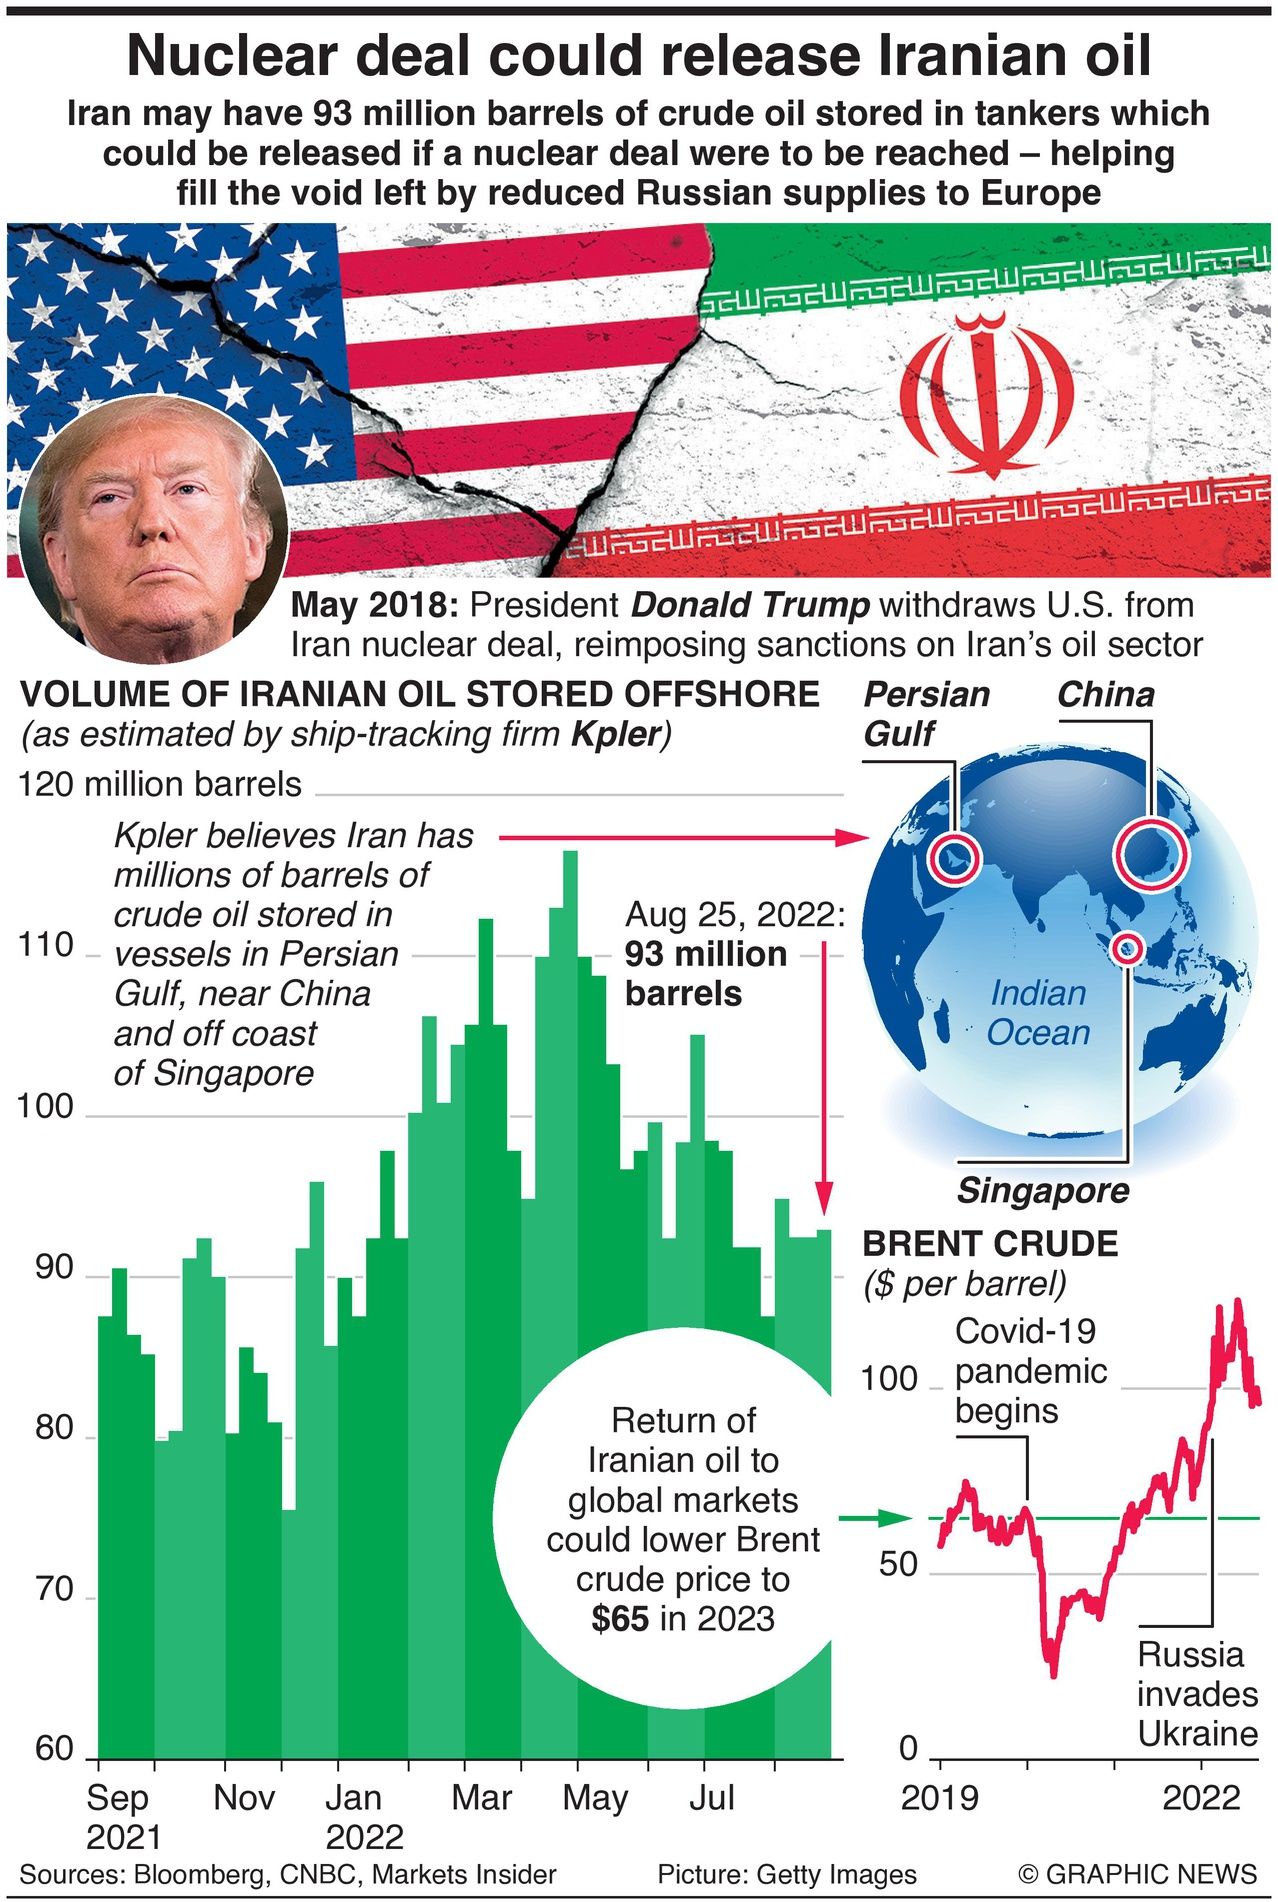 Infographic showing how Iranian Crude Oil could be released as a result of Nuclear Deal